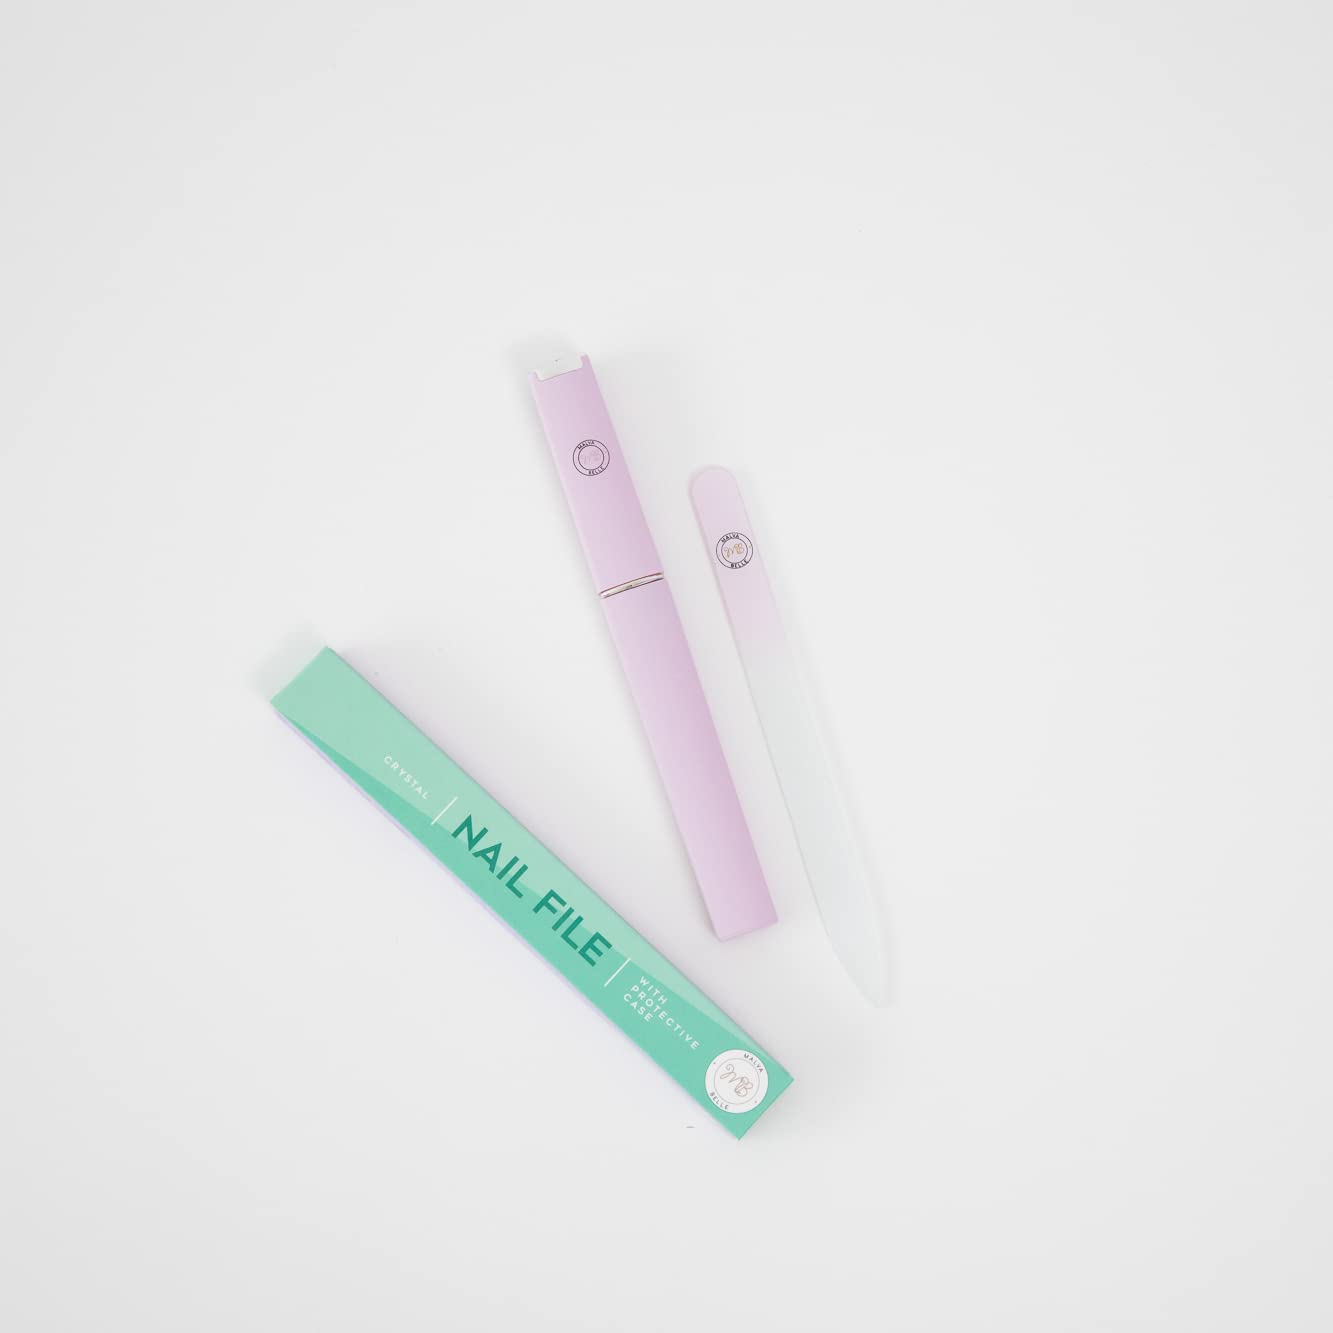 Crystal Glass Nail File with Protective Case - Pastel Lilac, 2mm